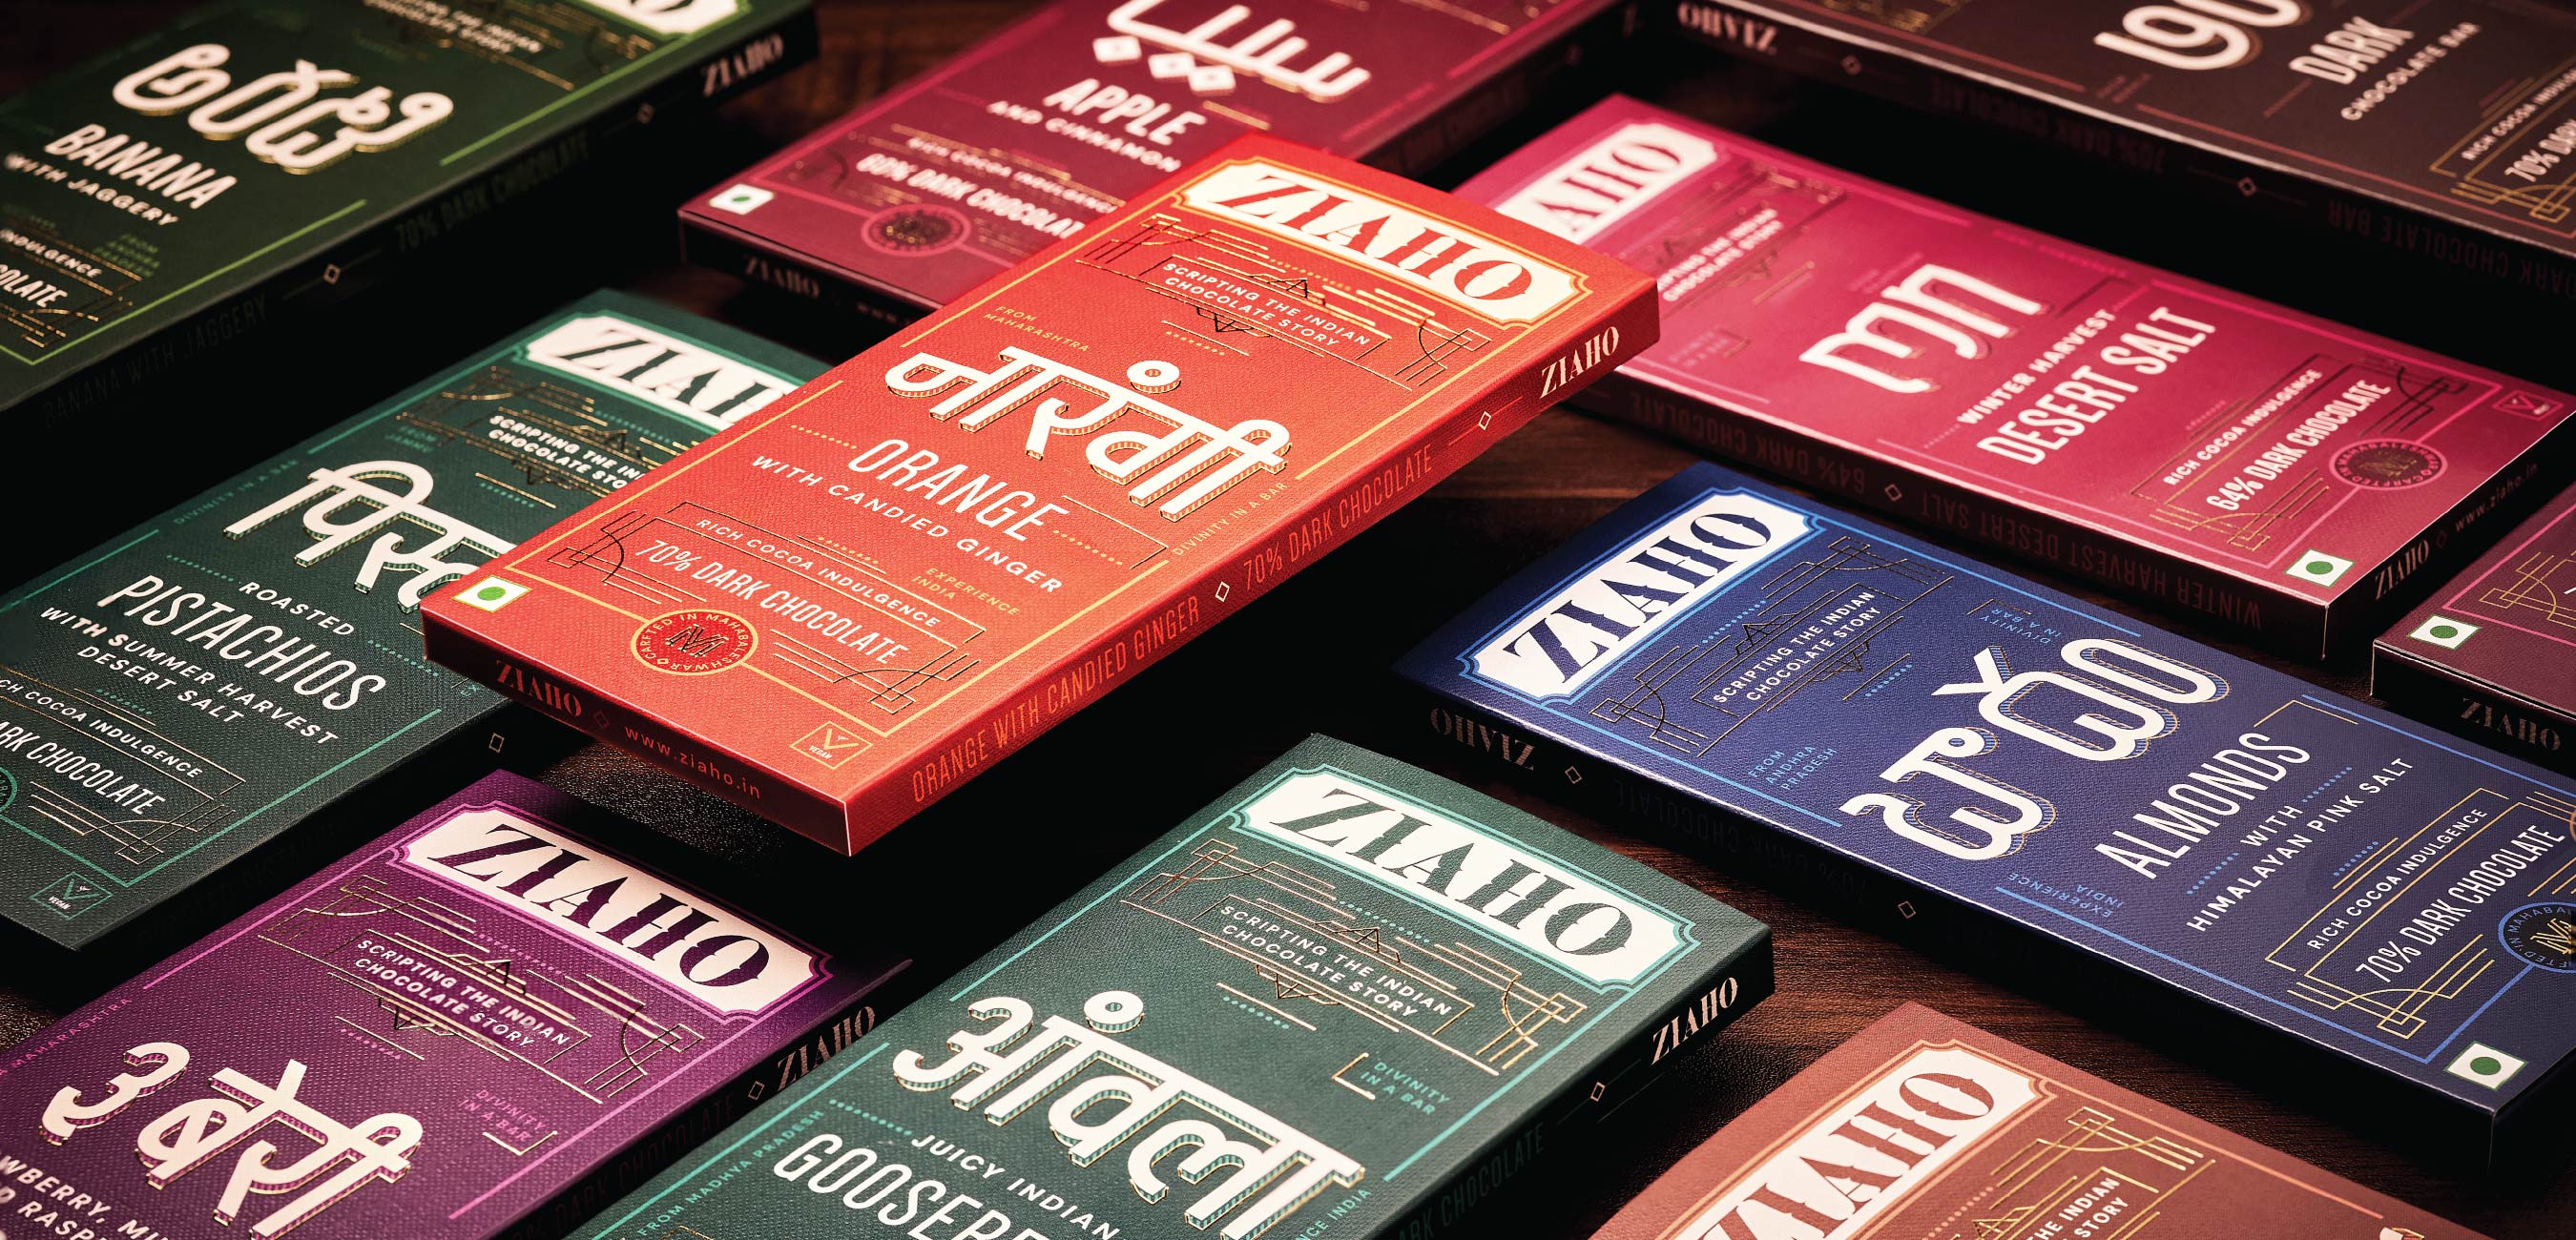 Ziaho Chocolate Branding and Packaging by Stratedgy